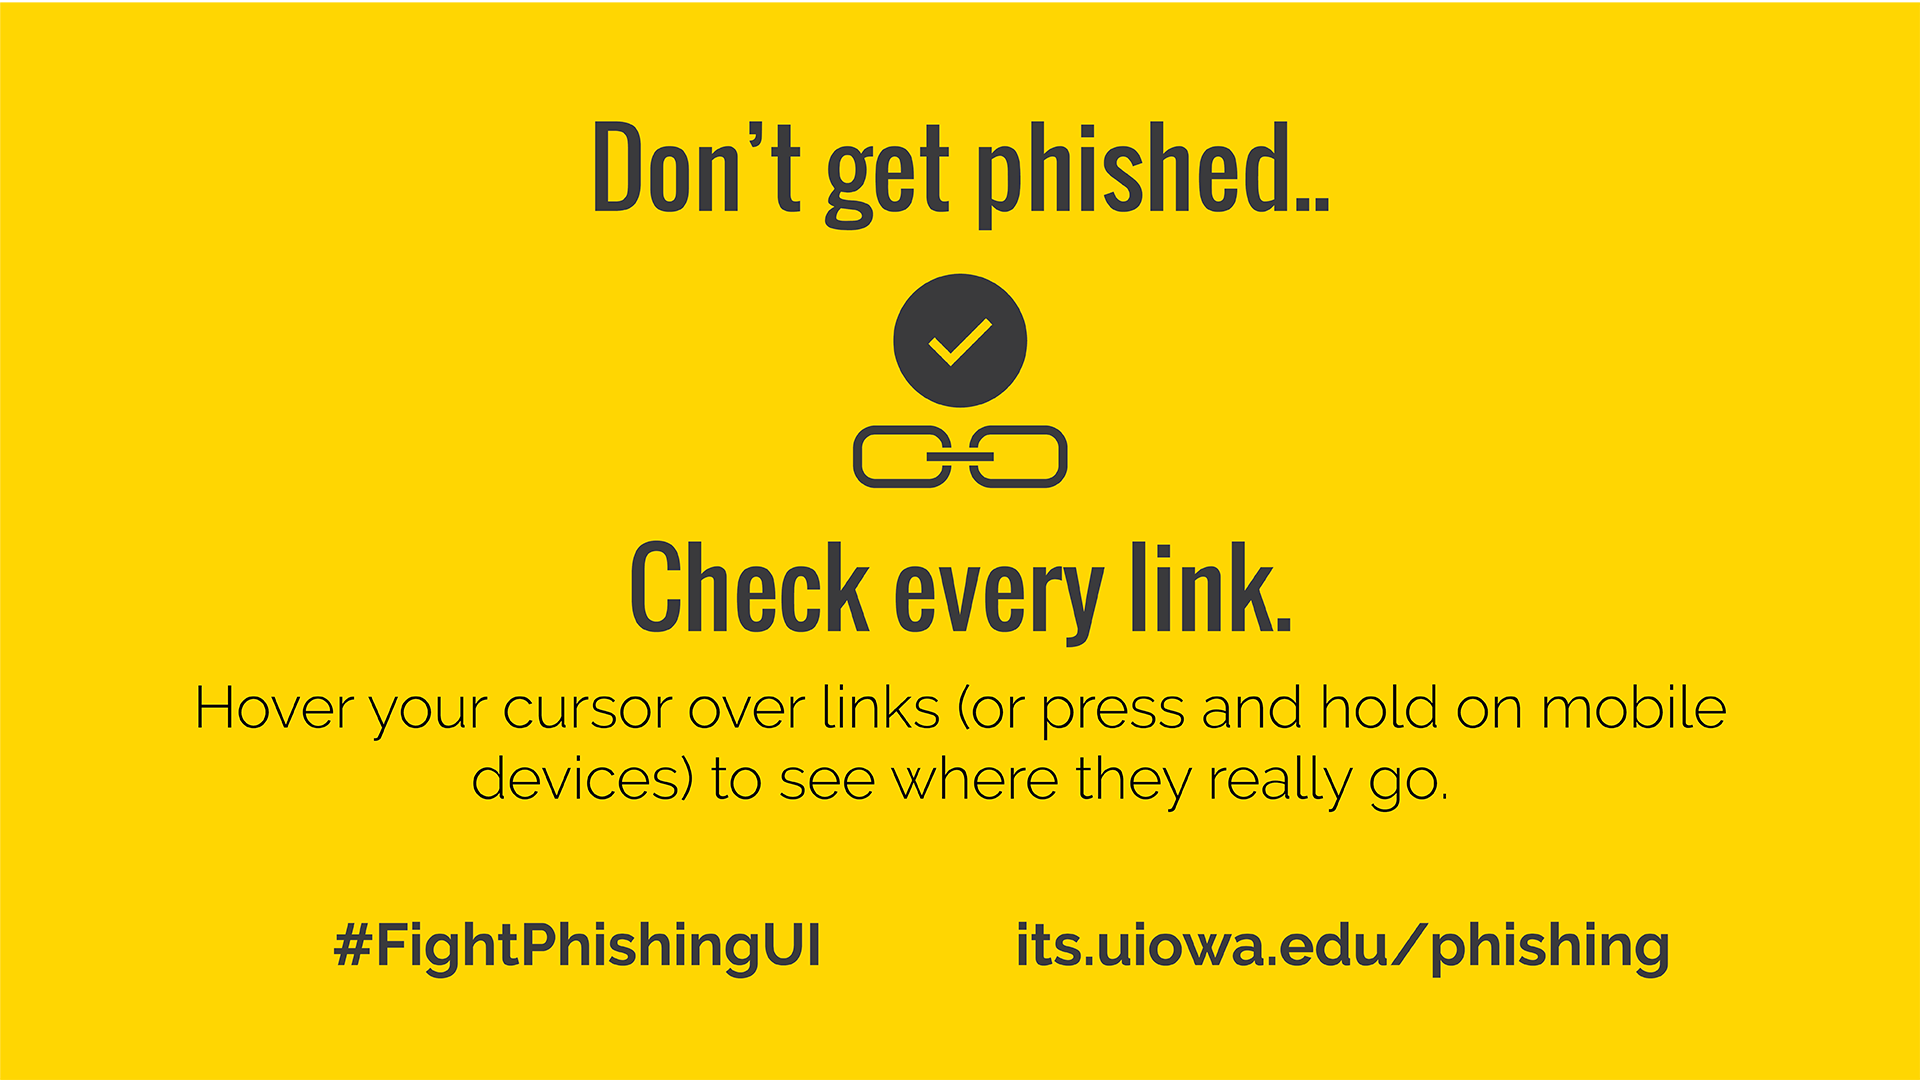 Don't get phished.. Check every link. Hover your cursor over links (or press and hold on mobile devices) to see where they really go. #FightPhishingUI its.uiowa.edu/phishing